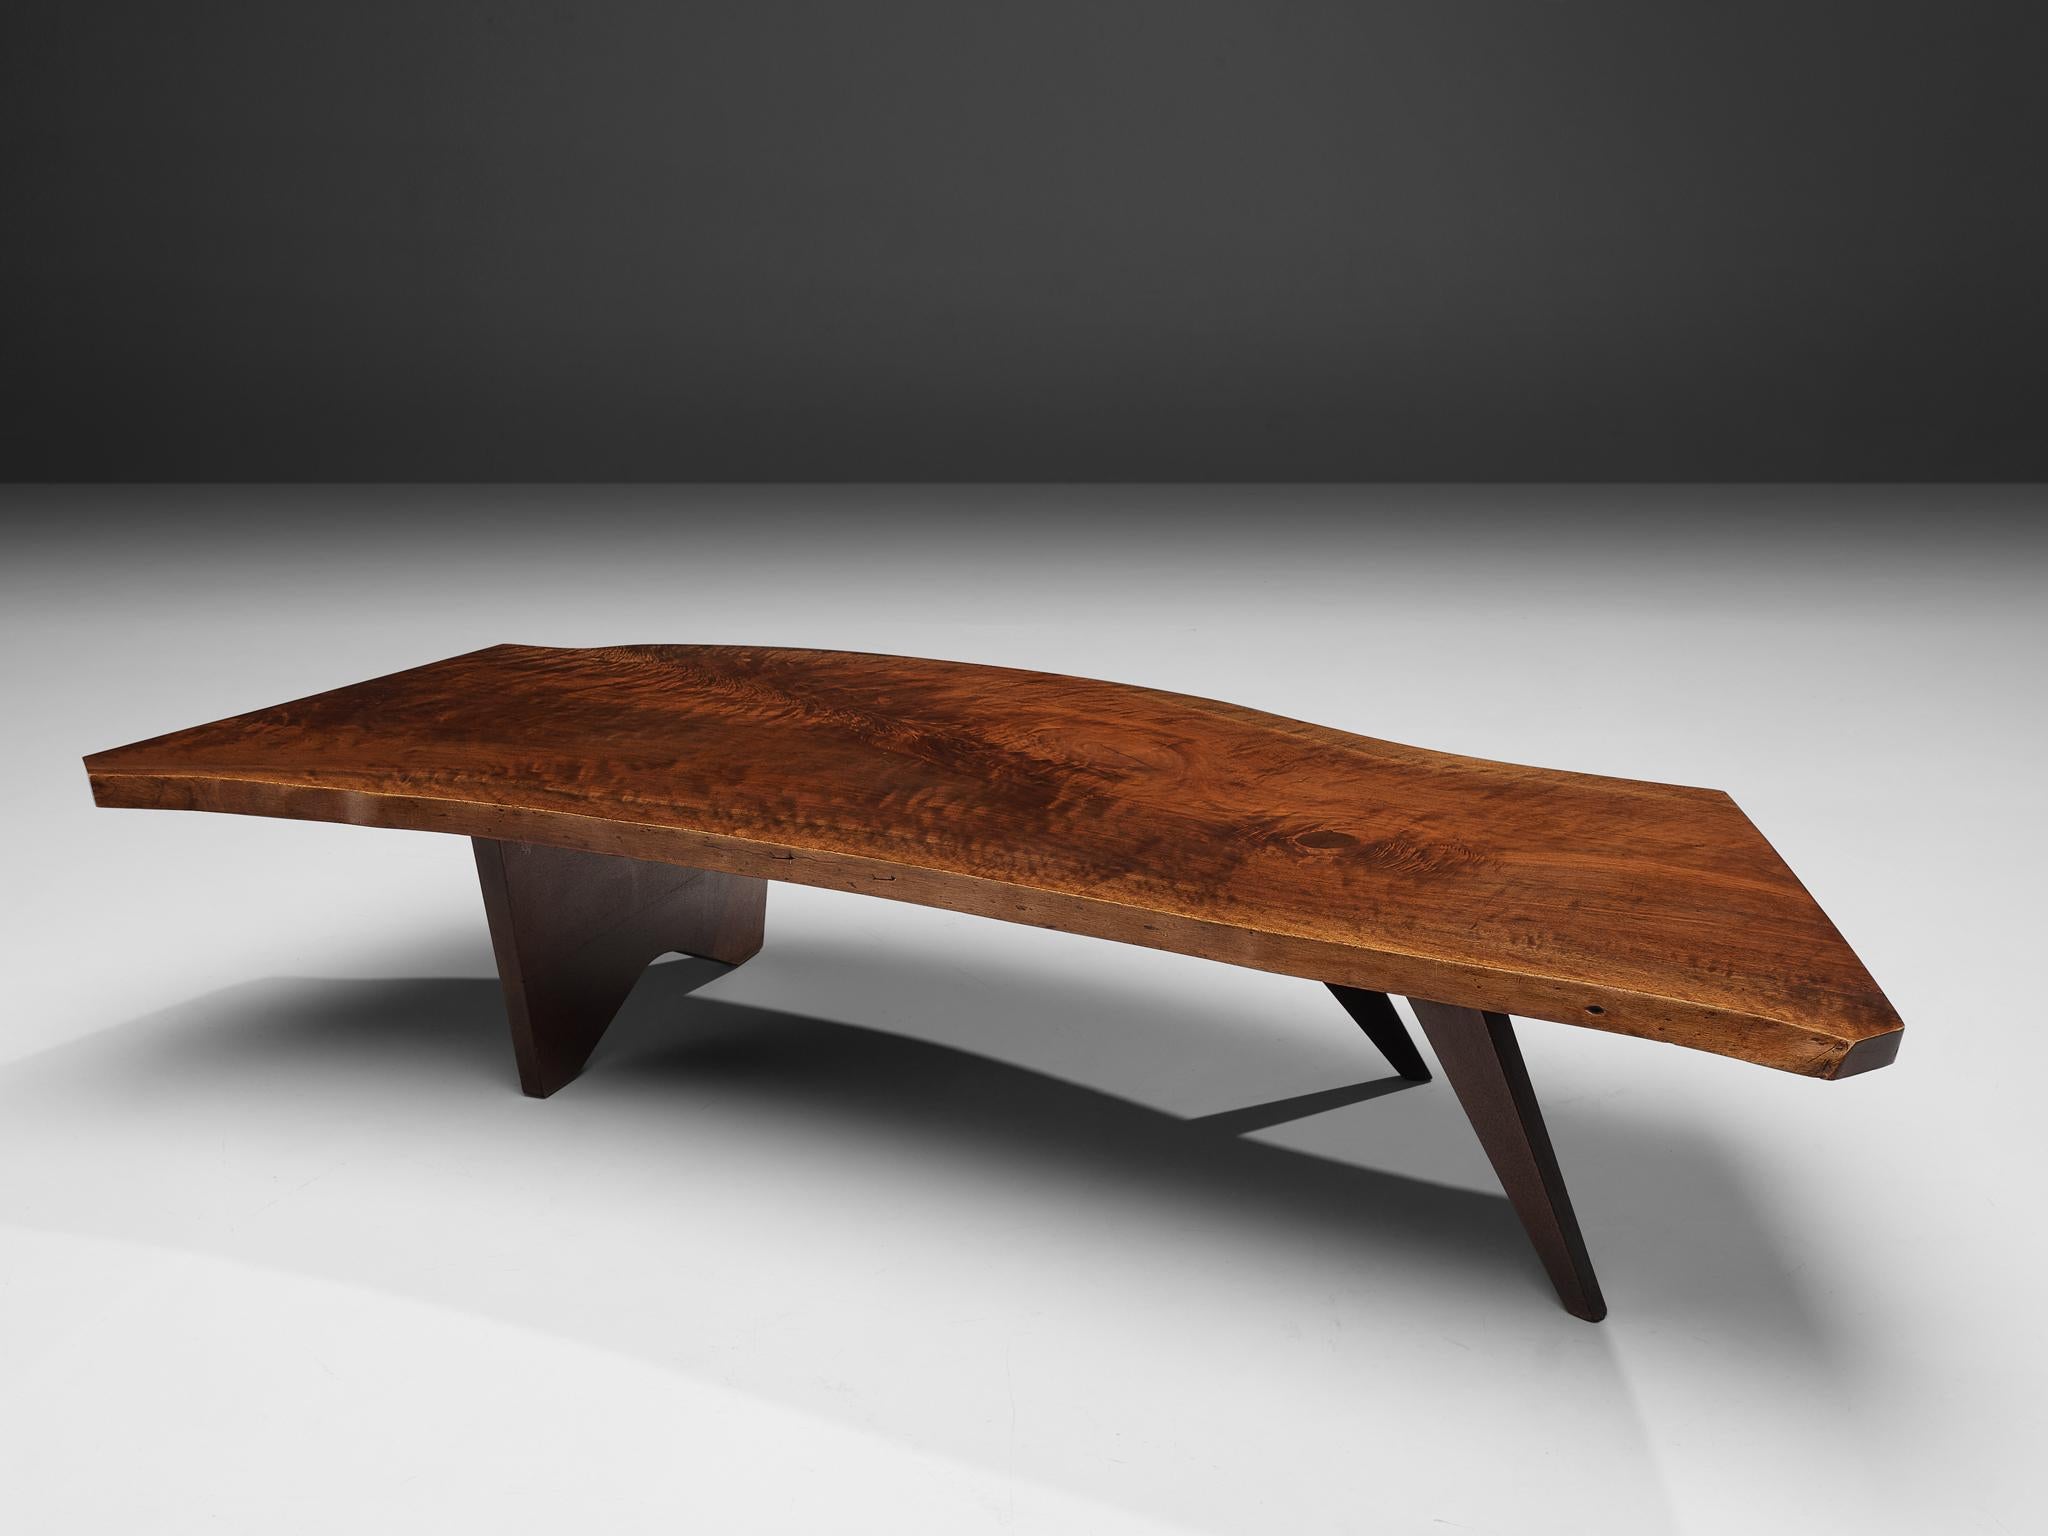 George Nakashima, slab coffee table, American walnut, United States, 1960s

A slab coffee table made of a solid board top. The coffee table is designed by George Nakashima ands expresses the character of a particular slab. The top features two